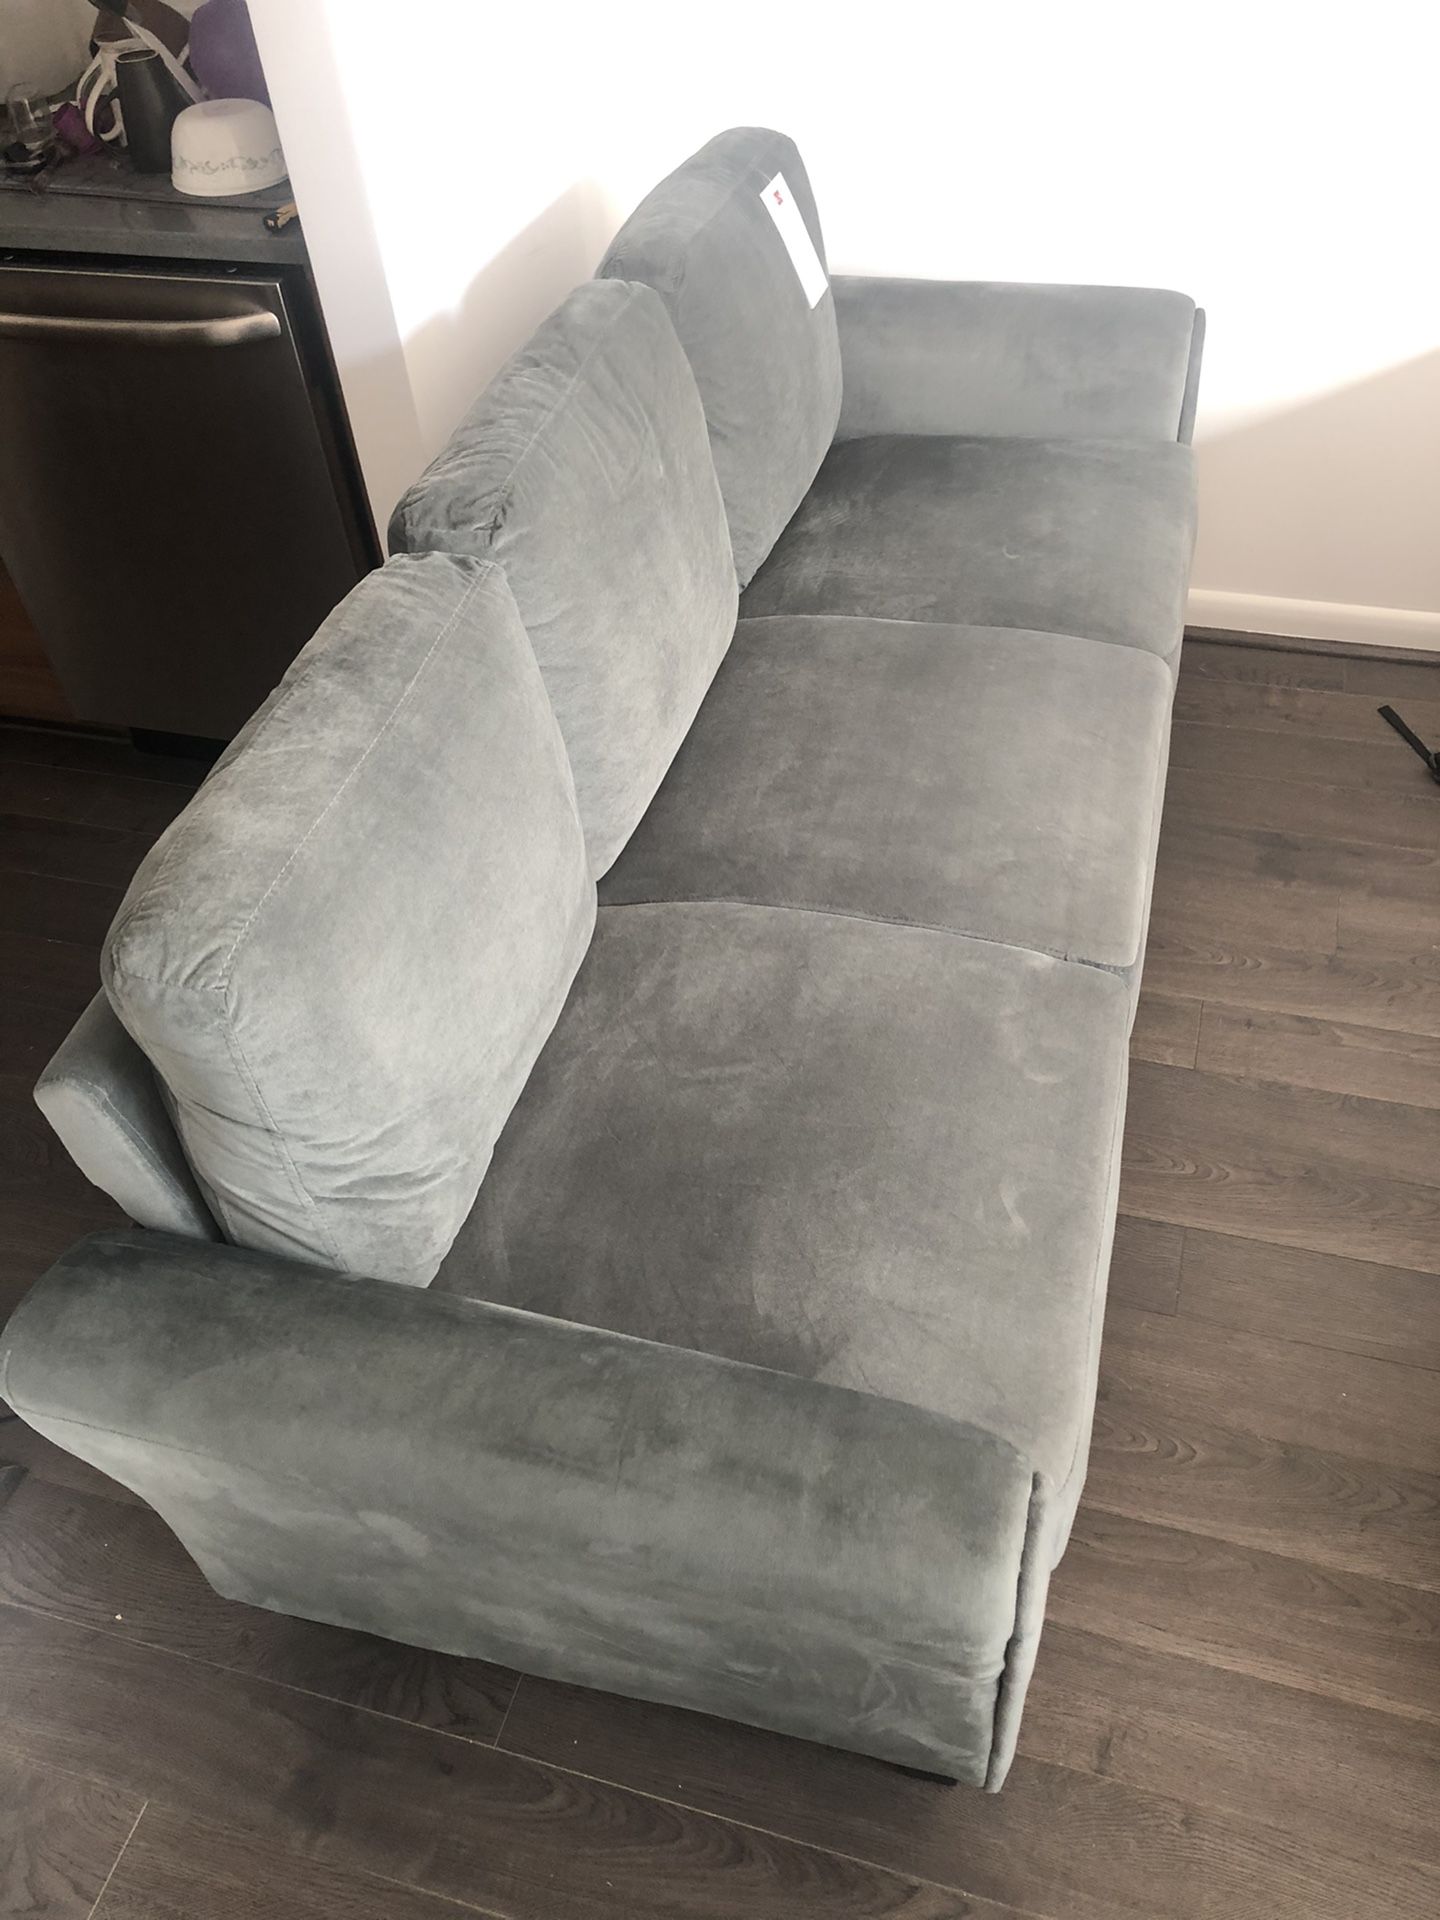 Brand New Couch with Tags- Small defect (see photo) price reduction